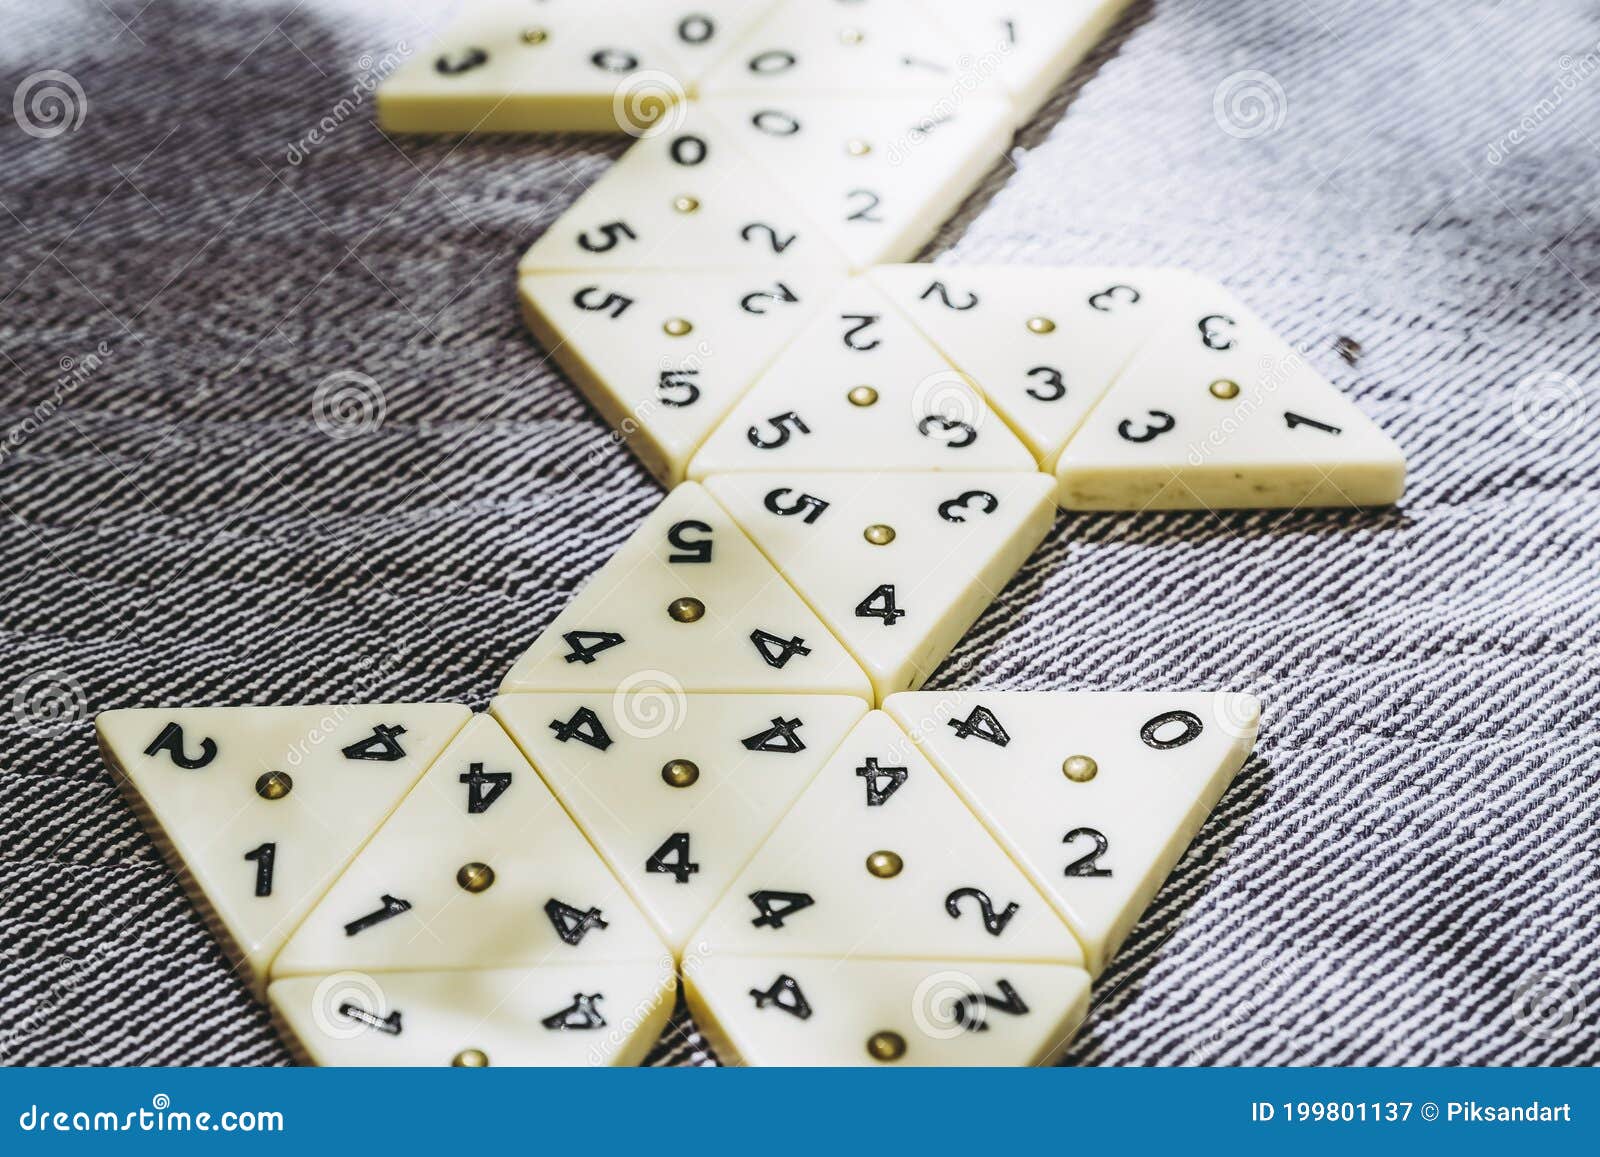 Strategy Game With Triangle Shaped Pieces And Numbers To Line Up Stock Image Image Of Draw Holiday